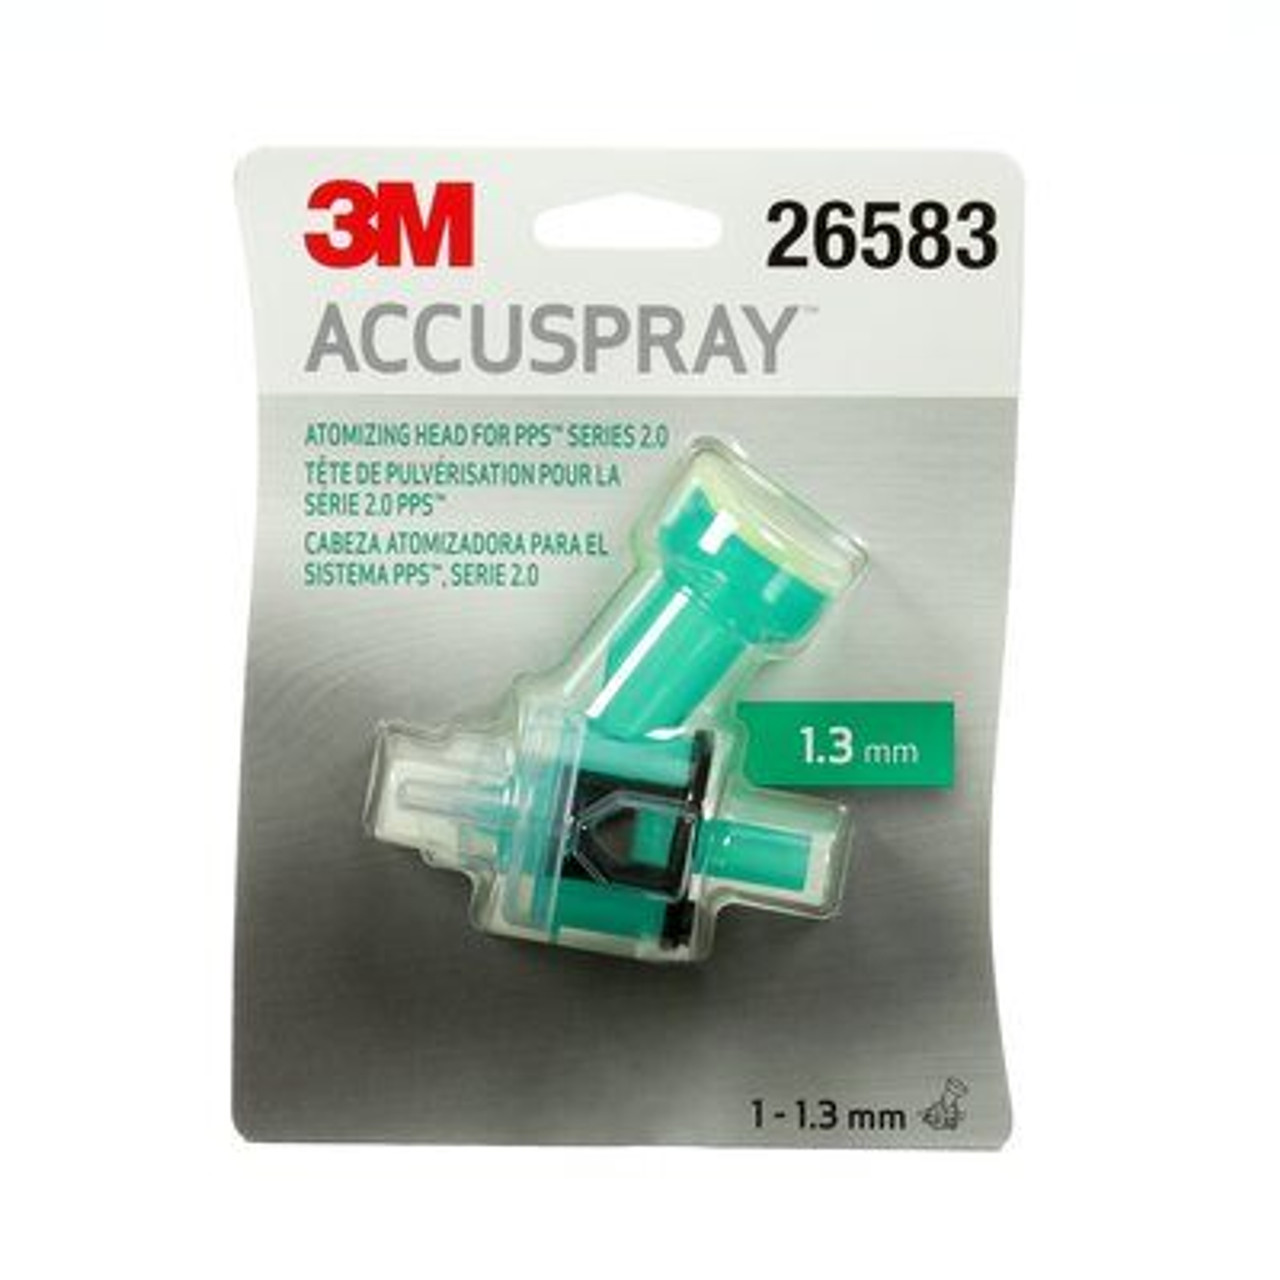 3M™ Accuspray™ Refill Pack for PPS™ Series 2.0, 26583, Green, 1.3 mm